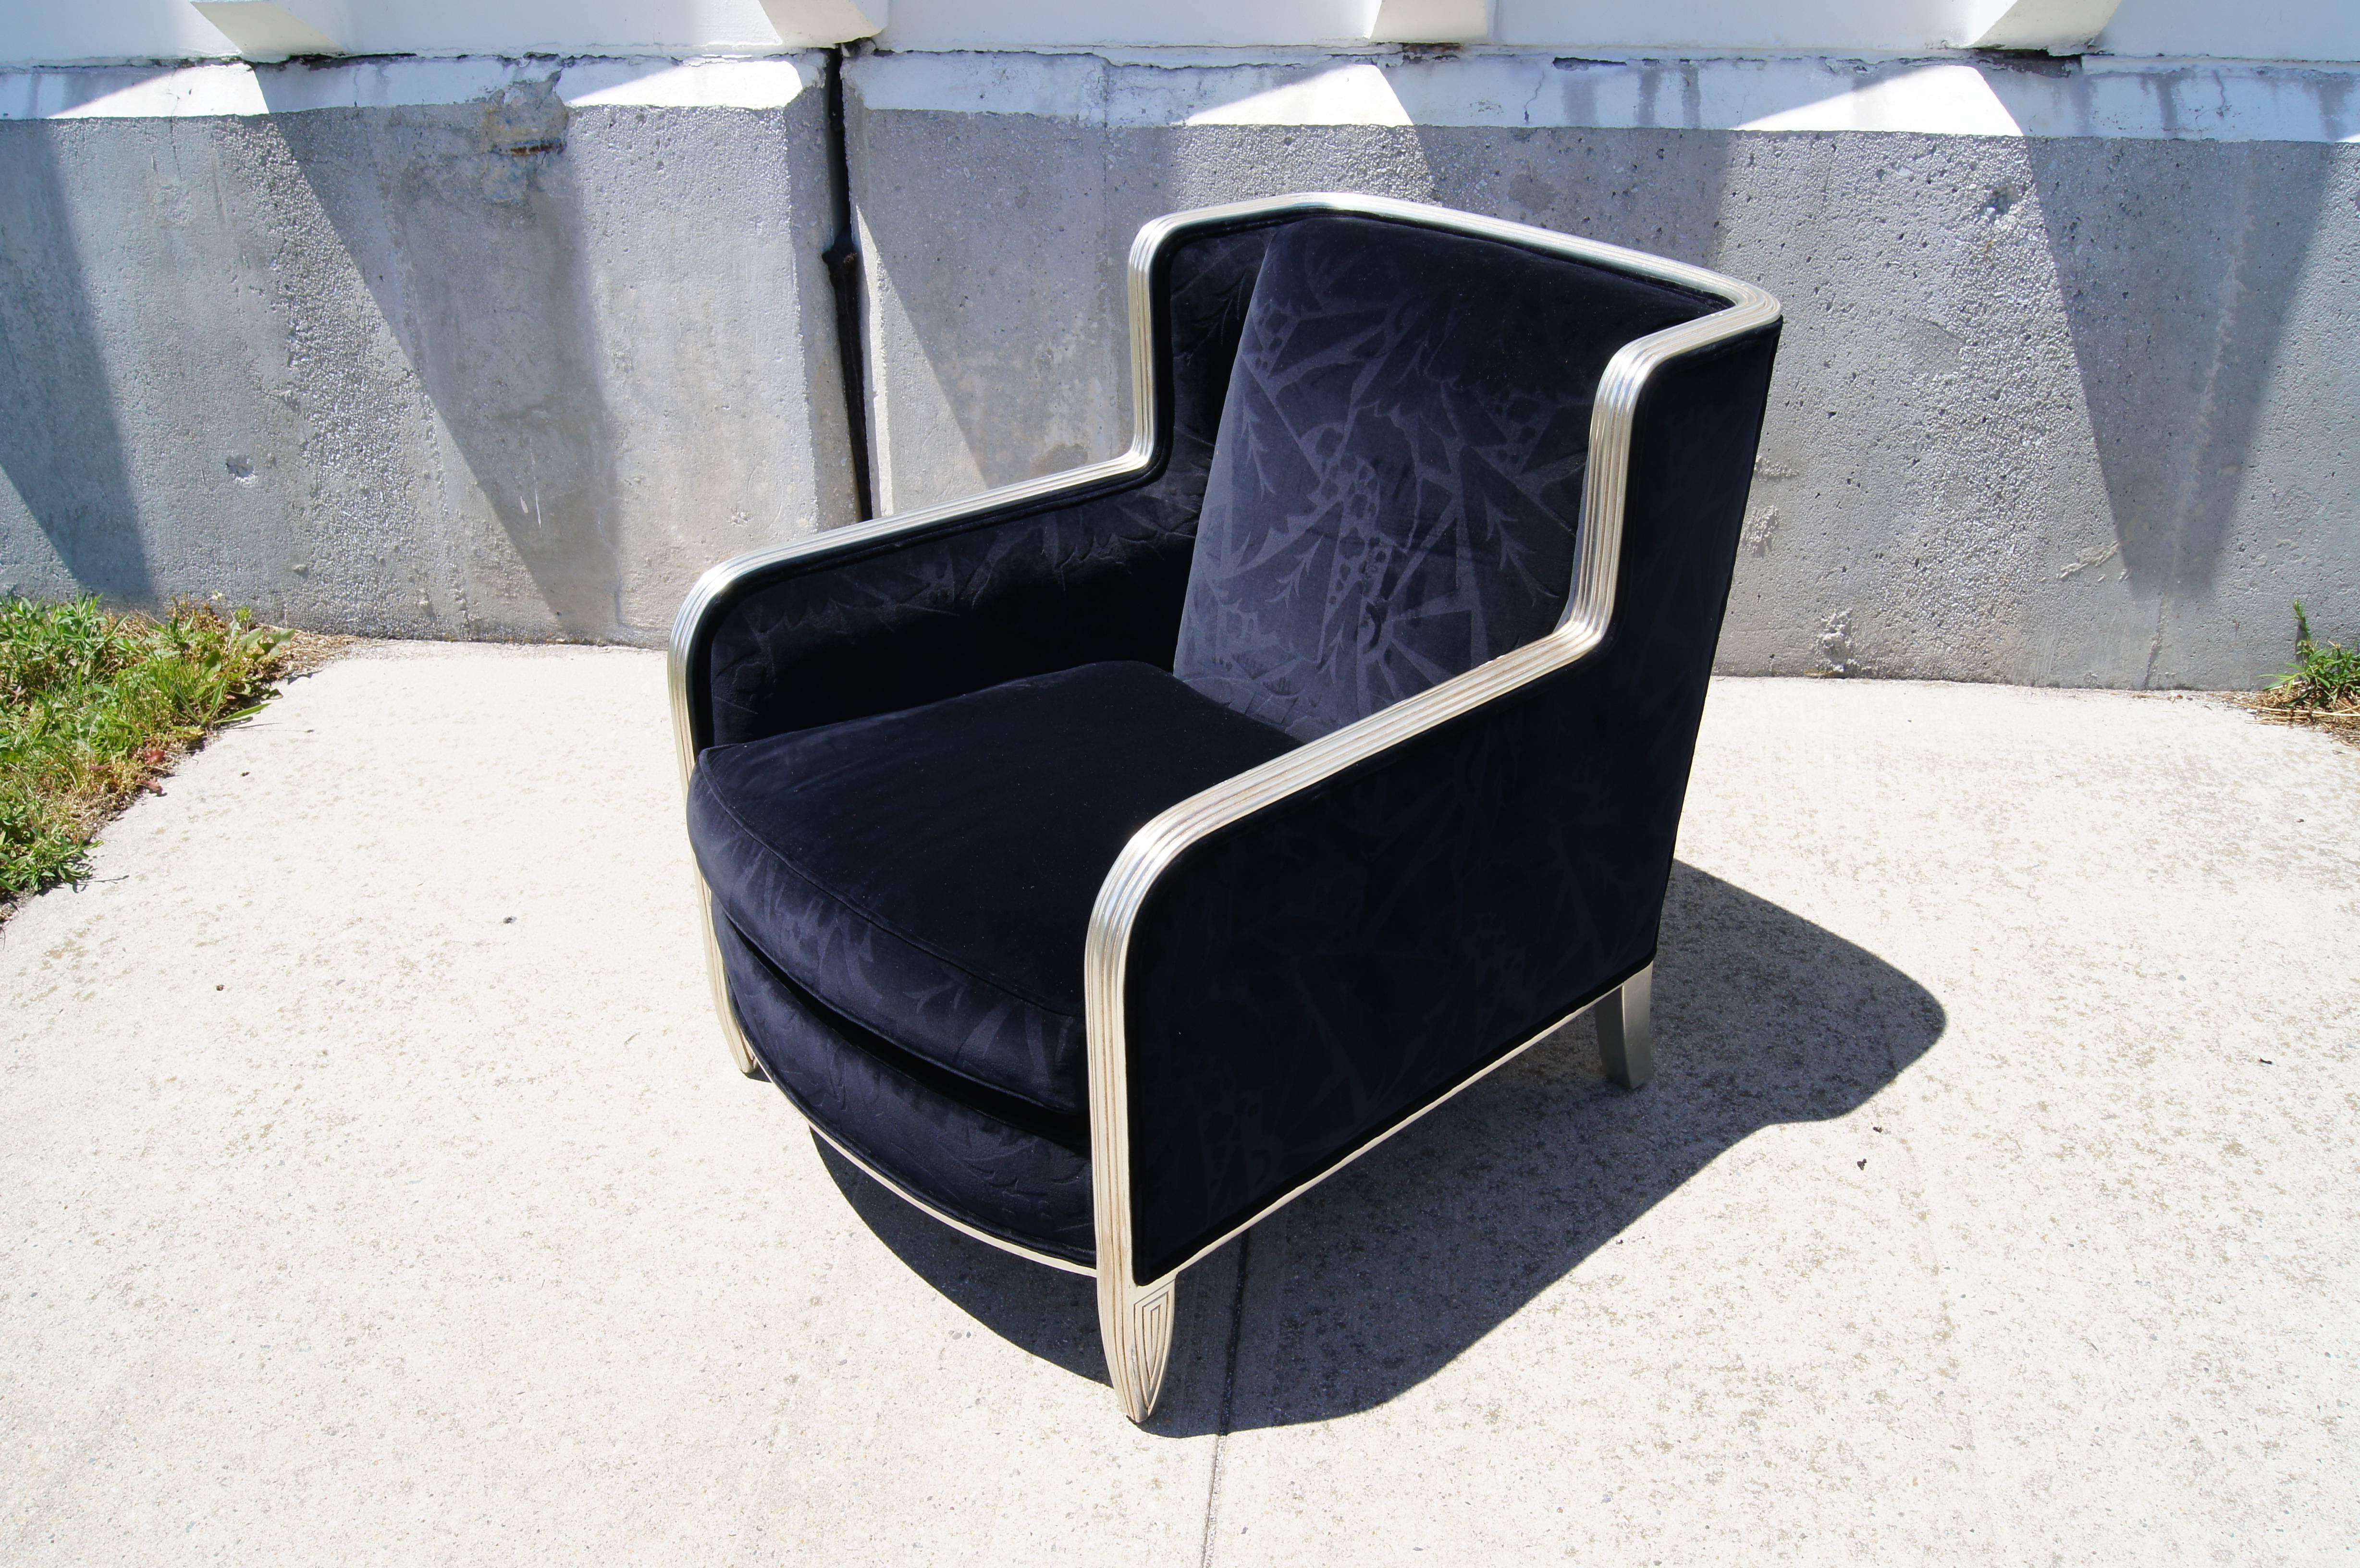 This luxurious club chair comes from Chicago-based custom furniture maker Interior Crafts. It is a beautiful late-20th- century interpretation of the art deco style, with deep blue cut velvet upholstery and a carved hardwood frame gilded with silver